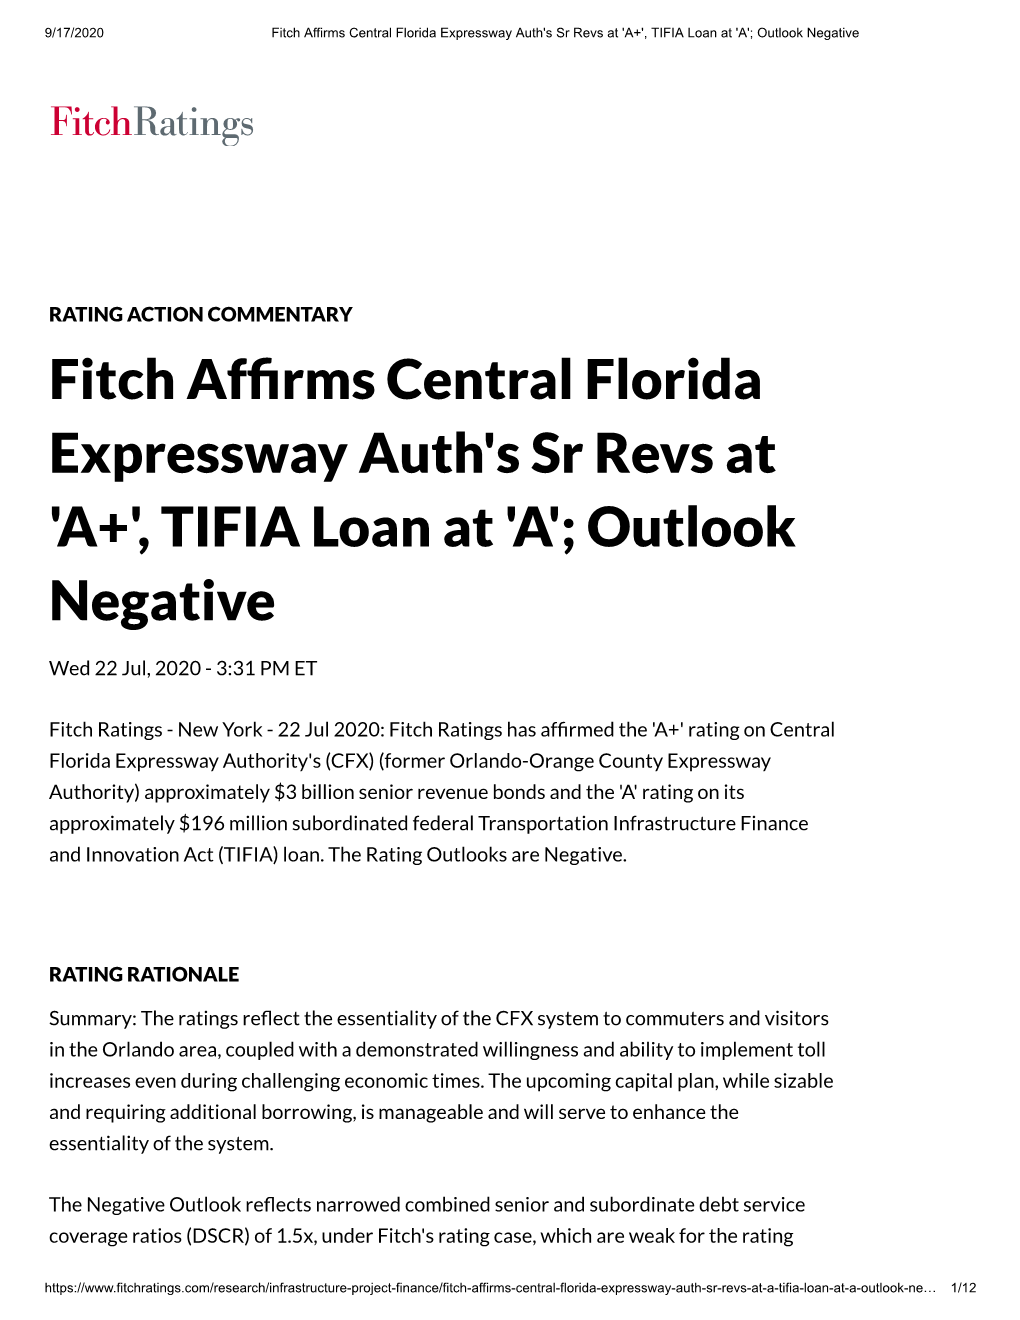 Fitch Af Rms Central Florida Expressway Auth's Sr Revs at 'A+'